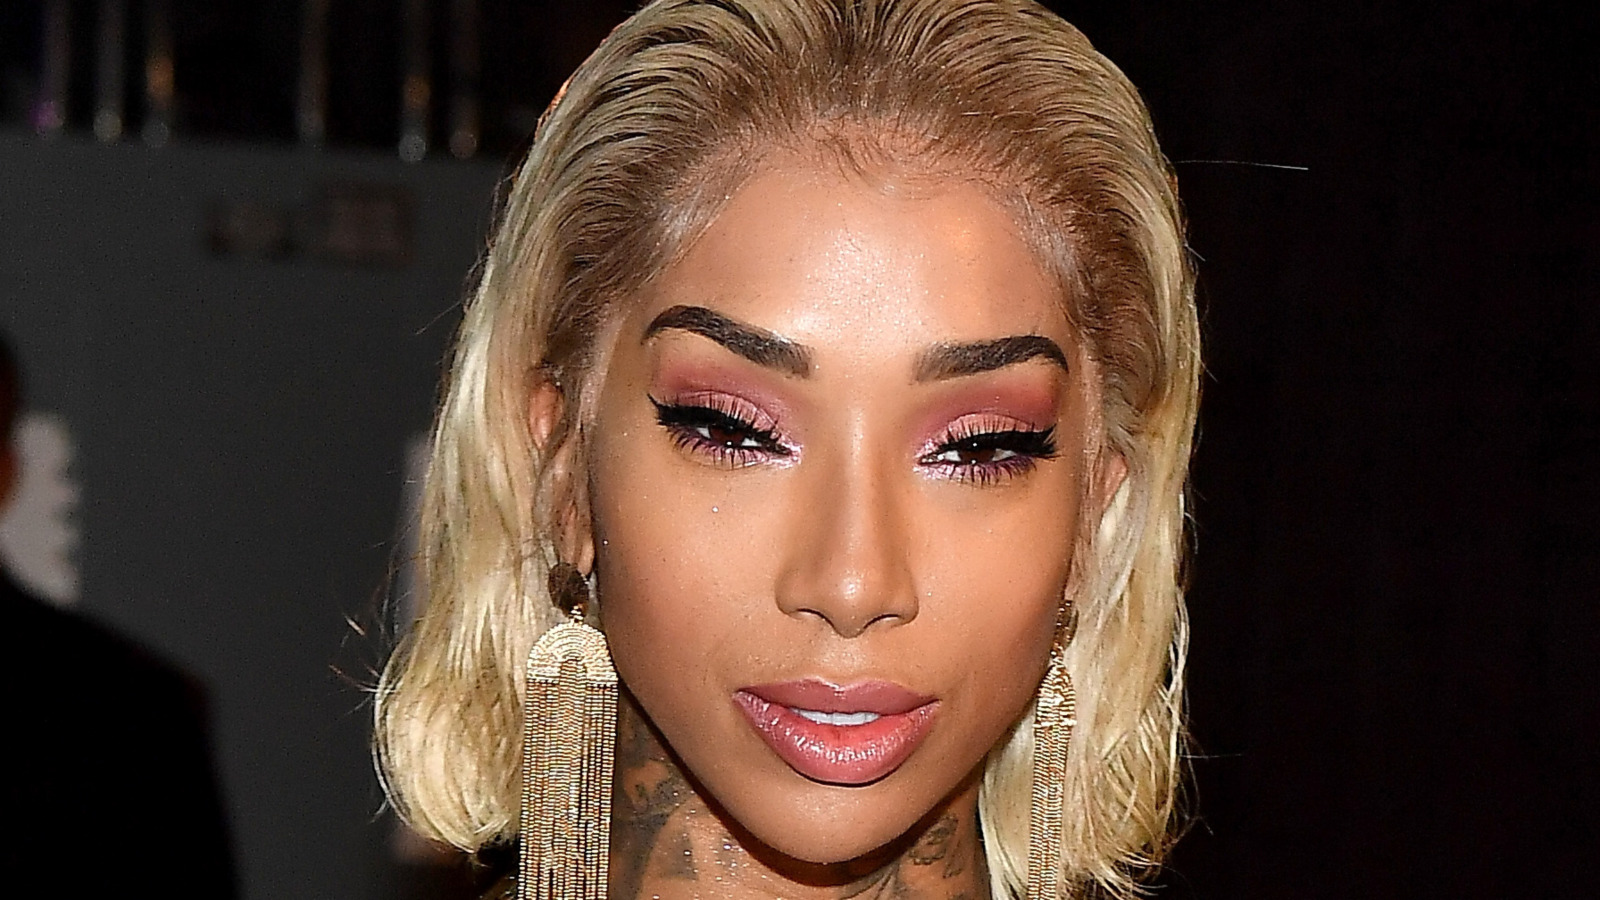 Sky From Black Ink Crew Shares Photos With Both of Her Sons on Instagram. 